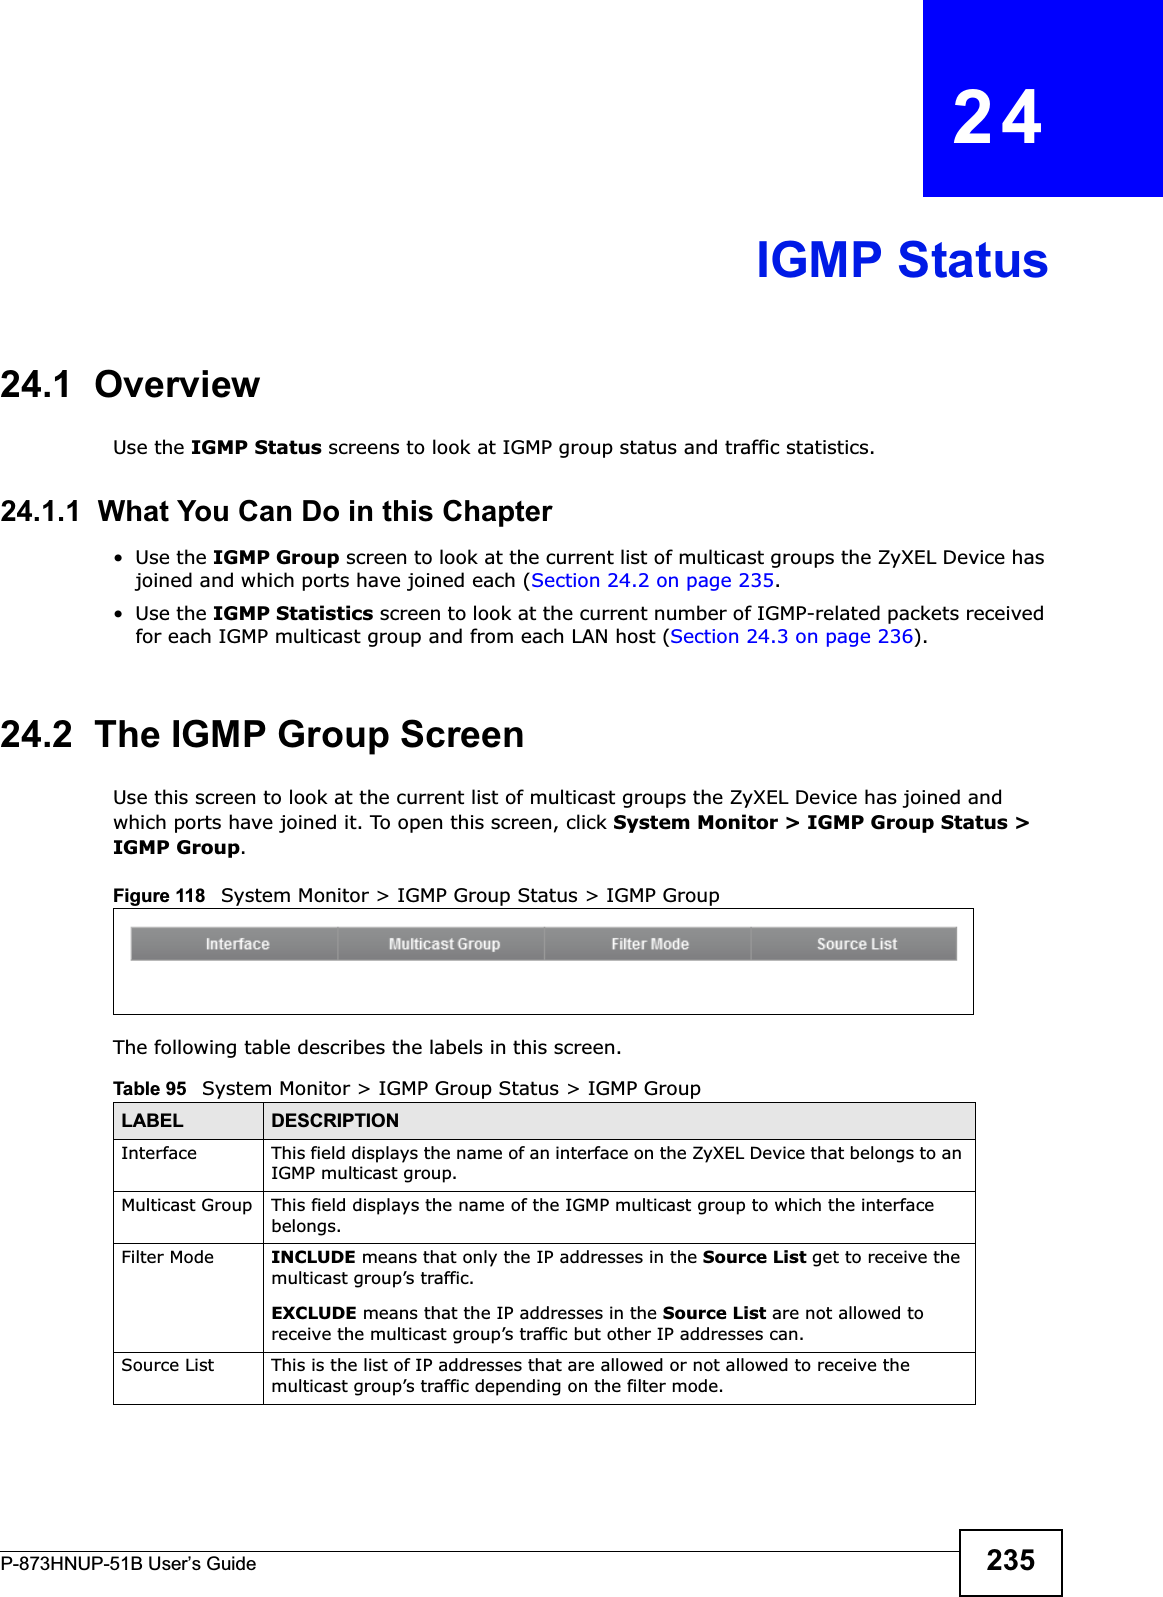 P-873HNUP-51B User’s Guide 235CHAPTER   24IGMP Status24.1  OverviewUse the IGMP Status screens to look at IGMP group status and traffic statistics. 24.1.1  What You Can Do in this Chapter•Use the IGMP Group screen to look at the current list of multicast groups the ZyXEL Device has joined and which ports have joined each (Section 24.2 on page 235.•Use the IGMP Statistics screen to look at the current number of IGMP-related packets received for each IGMP multicast group and from each LAN host (Section 24.3 on page 236).24.2  The IGMP Group ScreenUse this screen to look at the current list of multicast groups the ZyXEL Device has joined and which ports have joined it. To open this screen, click System Monitor &gt; IGMP Group Status &gt; IGMP Group.Figure 118   System Monitor &gt; IGMP Group Status &gt; IGMP GroupThe following table describes the labels in this screen.Table 95   System Monitor &gt; IGMP Group Status &gt; IGMP GroupLABEL DESCRIPTIONInterface This field displays the name of an interface on the ZyXEL Device that belongs to an IGMP multicast group. Multicast Group This field displays the name of the IGMP multicast group to which the interface belongs. Filter Mode  INCLUDE means that only the IP addresses in the Source List get to receive the multicast group’s traffic.EXCLUDE means that the IP addresses in the Source List are not allowed to receive the multicast group’s traffic but other IP addresses can.Source List This is the list of IP addresses that are allowed or not allowed to receive the multicast group’s traffic depending on the filter mode.